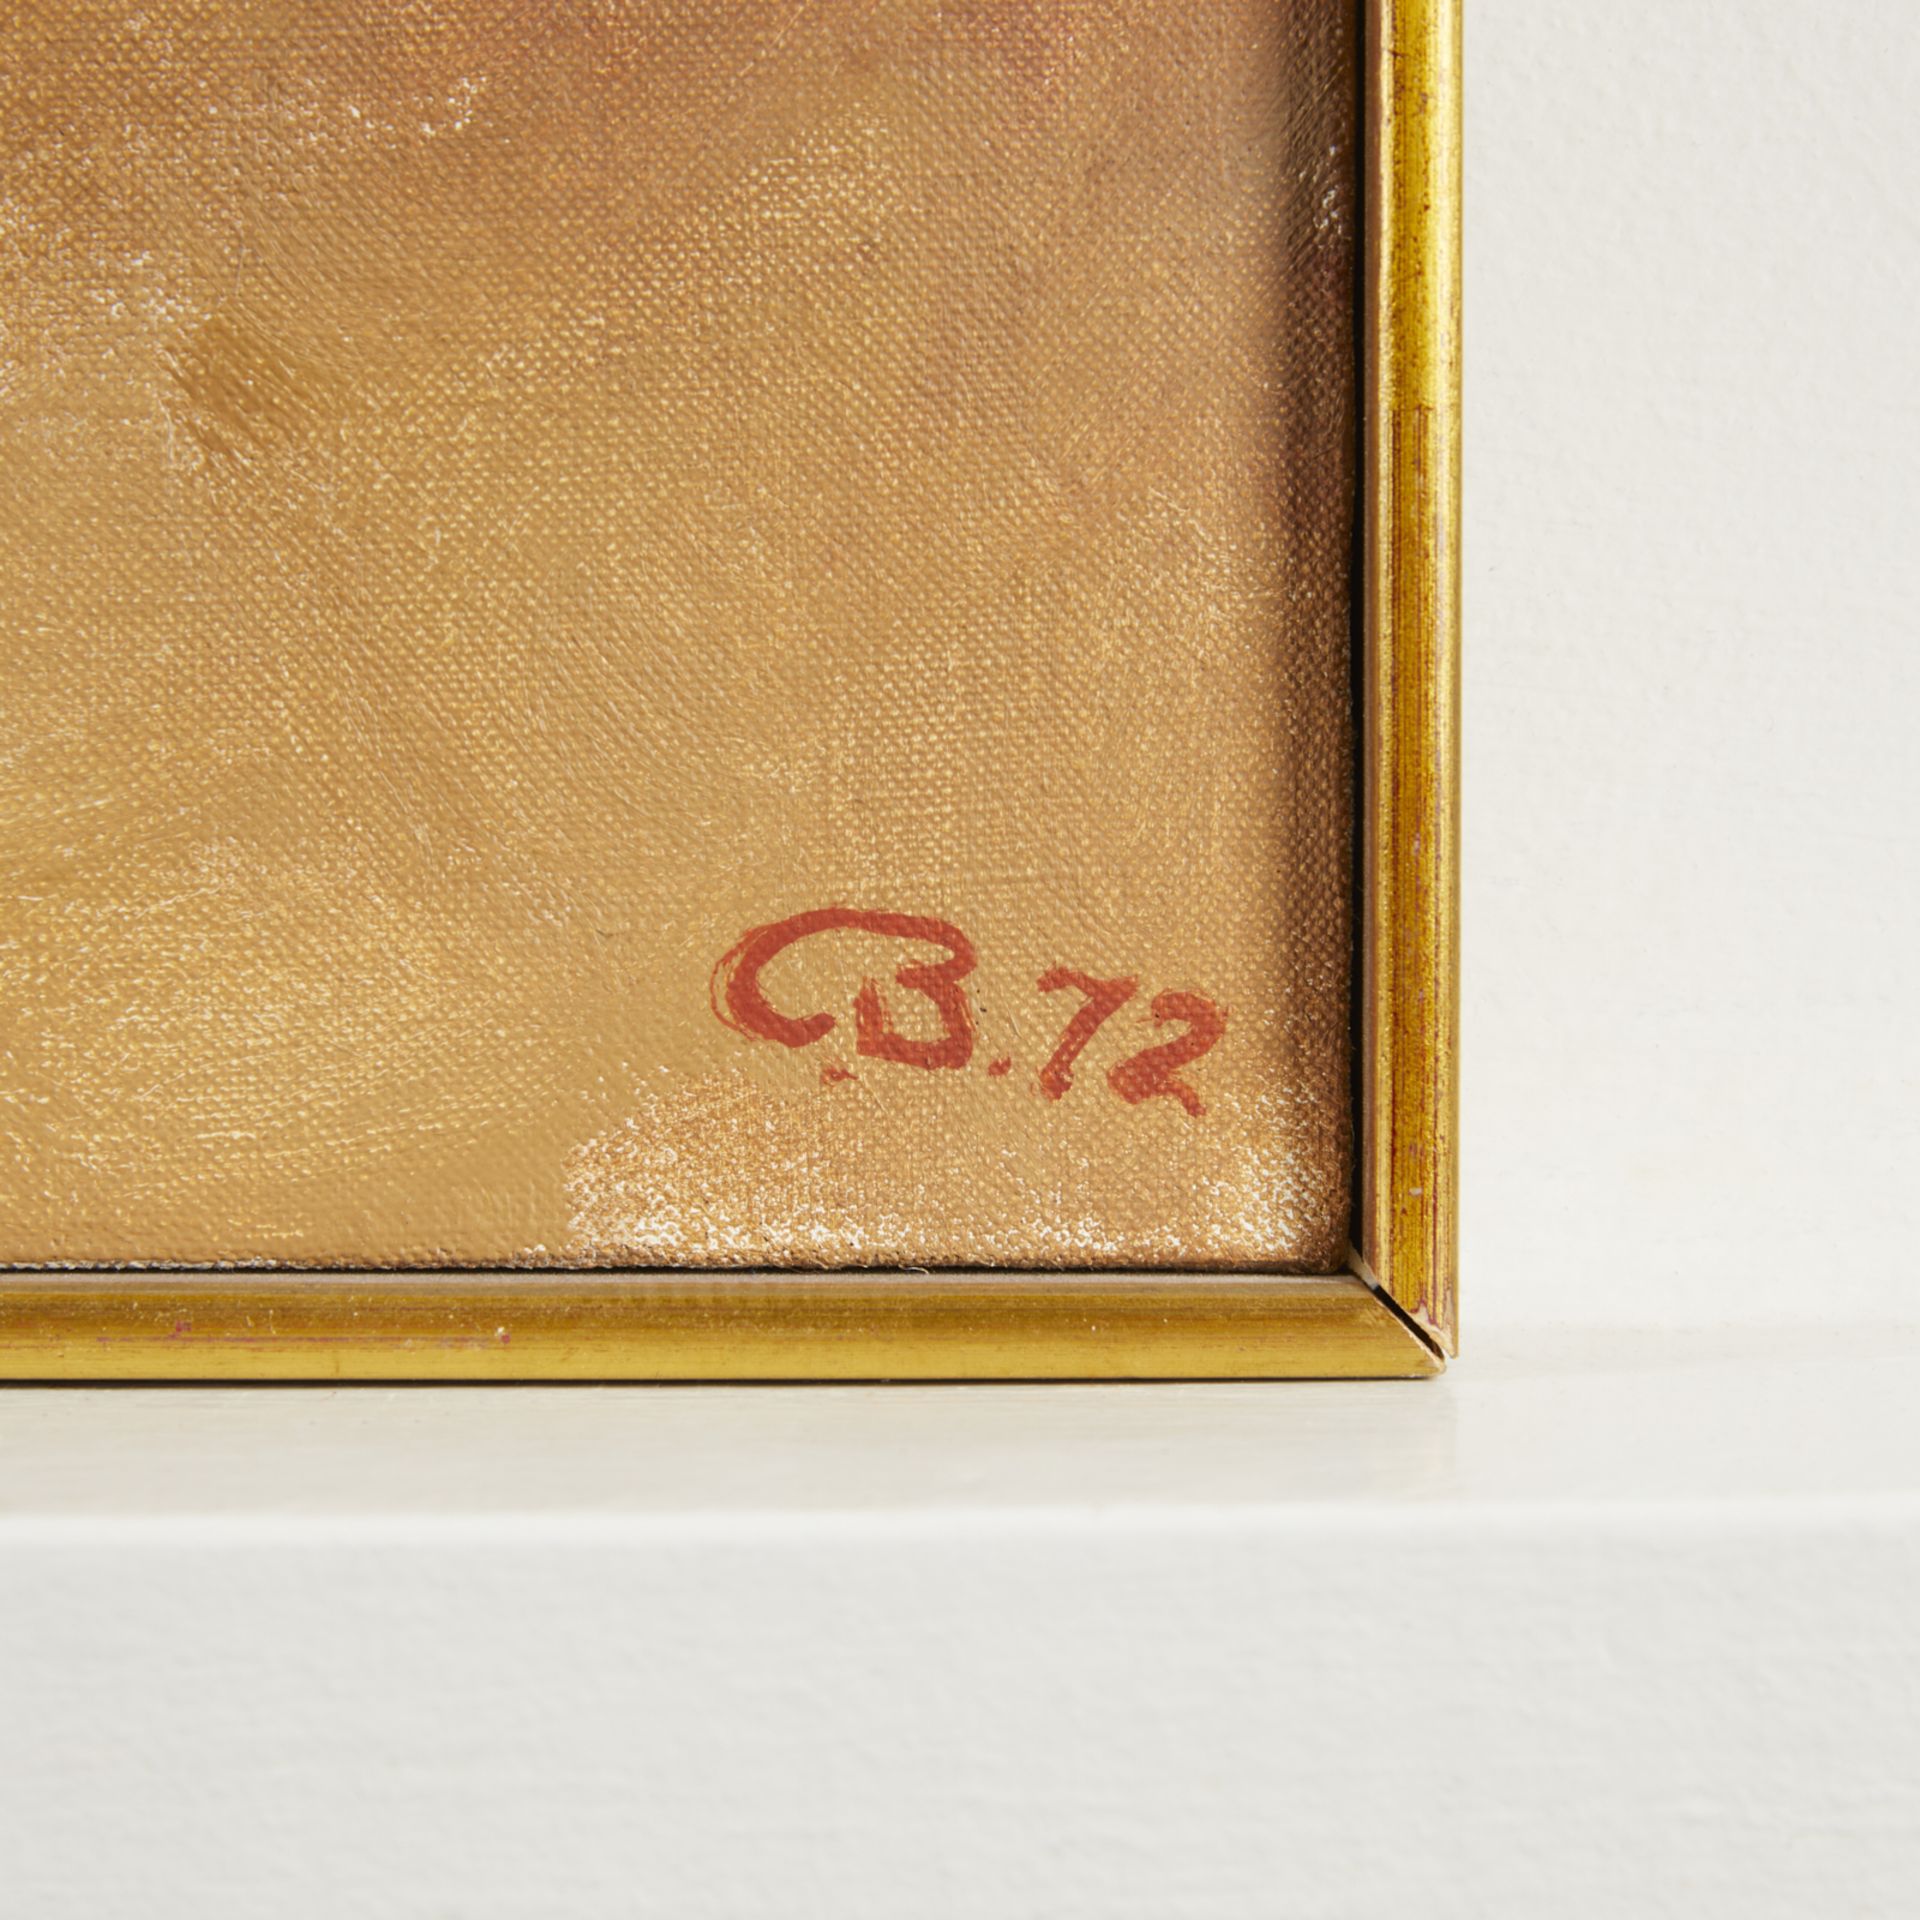 Cameron Booth "2 Bays 2 Greys" Horse Painting 1972 - Image 5 of 13